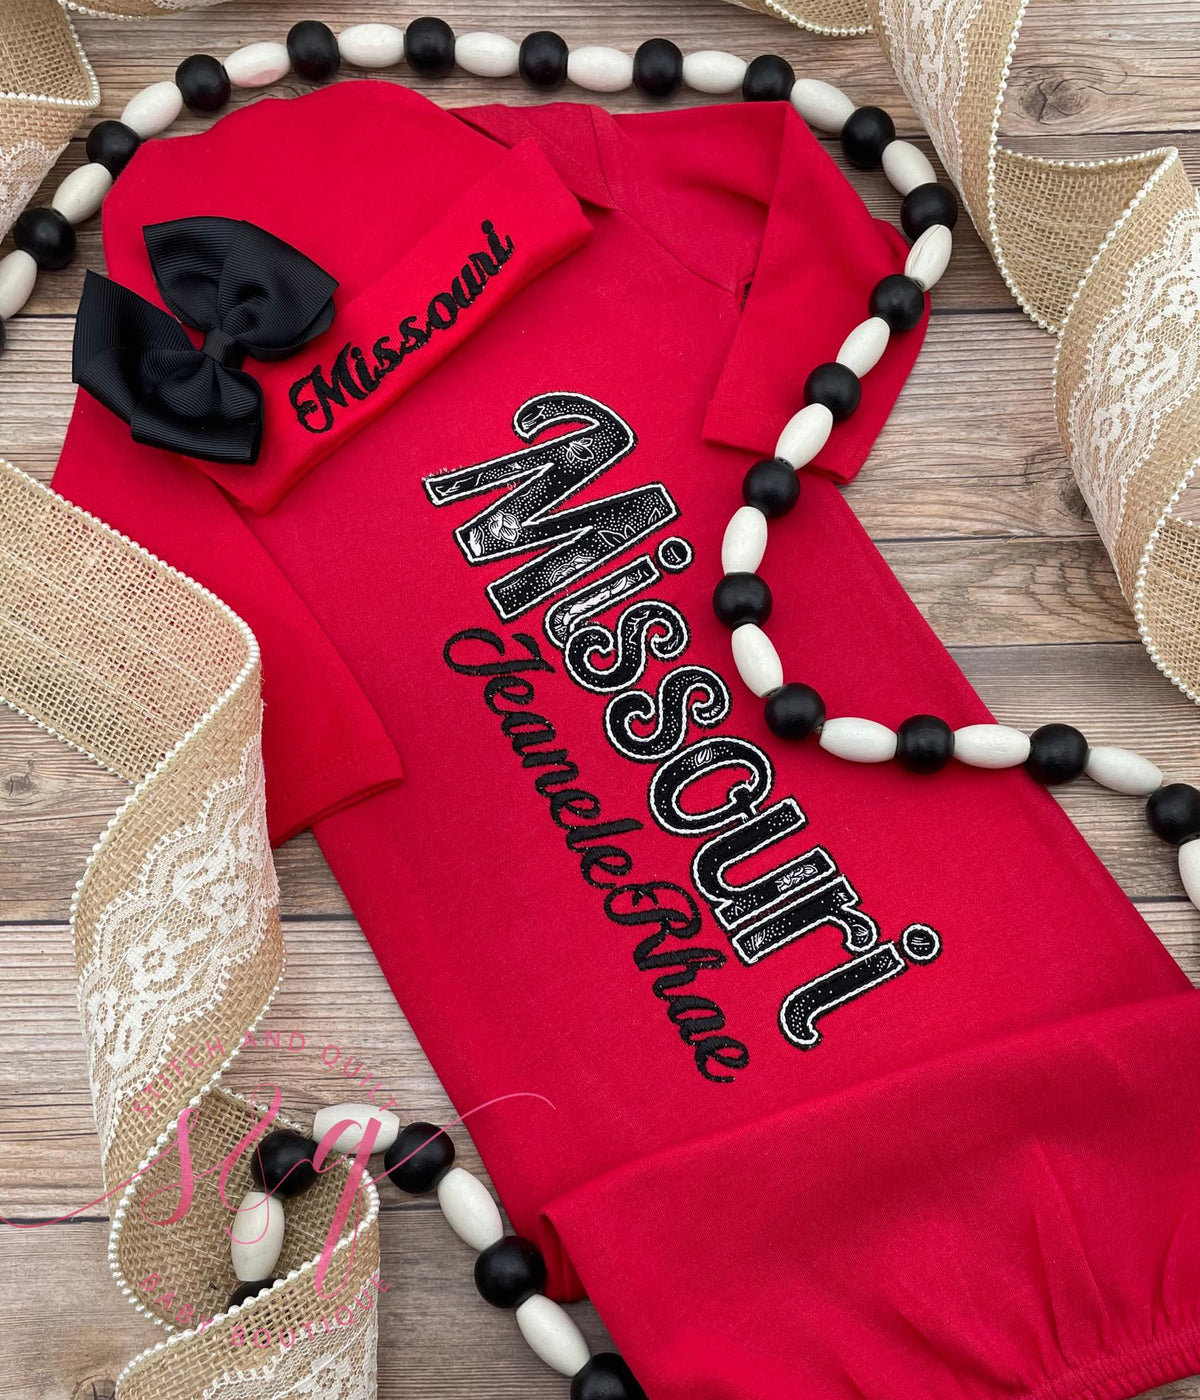 Newborn infant coming home outfit, Newborn gowns girl,  Red and Black Baby